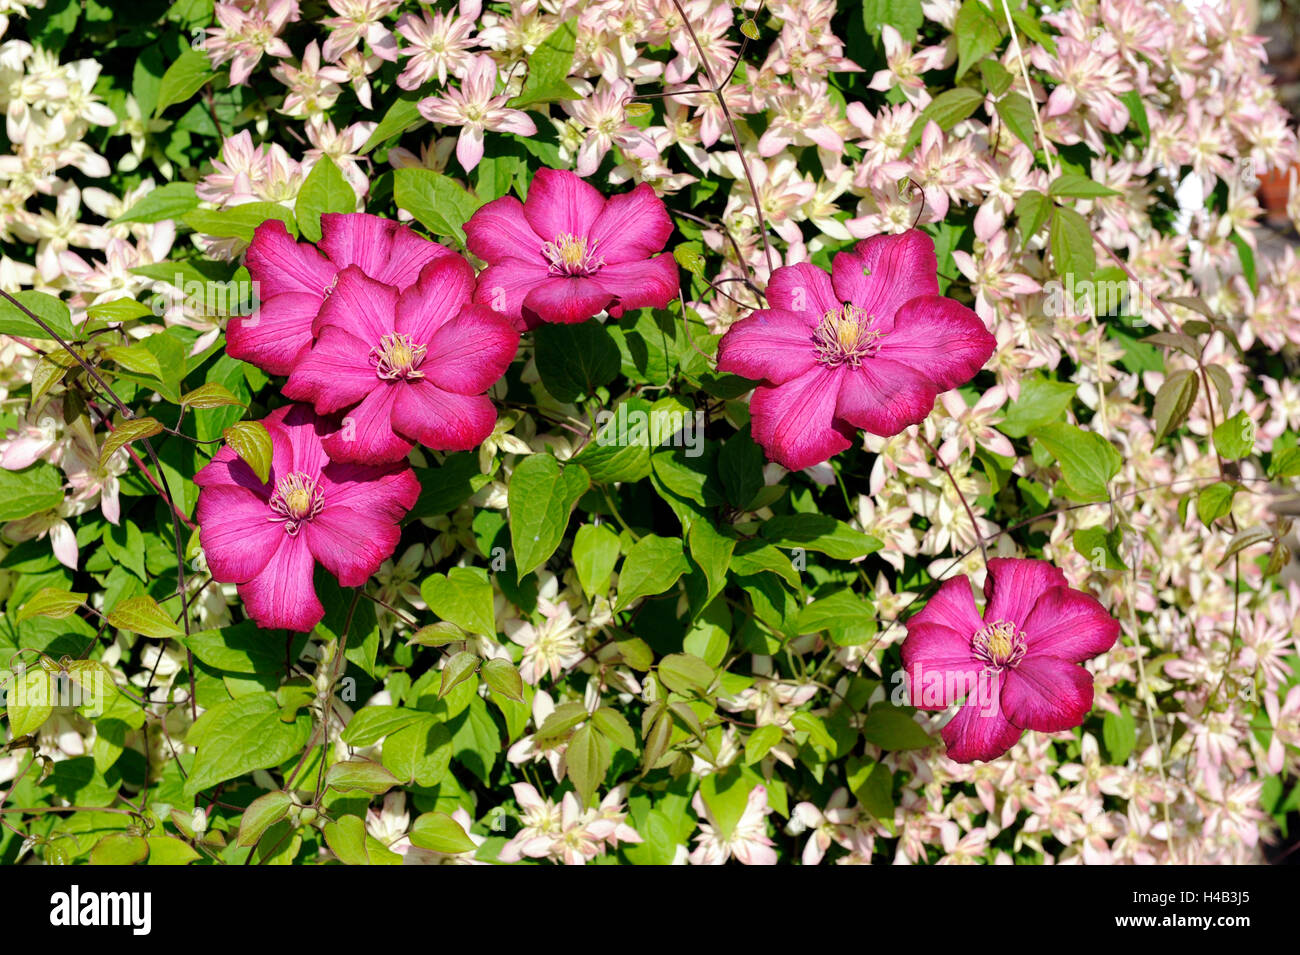 Sociable climbing plants, Clematis, sorts Clematis Montana Dusky star, from New Zealand, small pale pink blossoms, Clematis Ville de Lyons, big carmine red blossoms, climbing support, early-summer garden Stock Photo